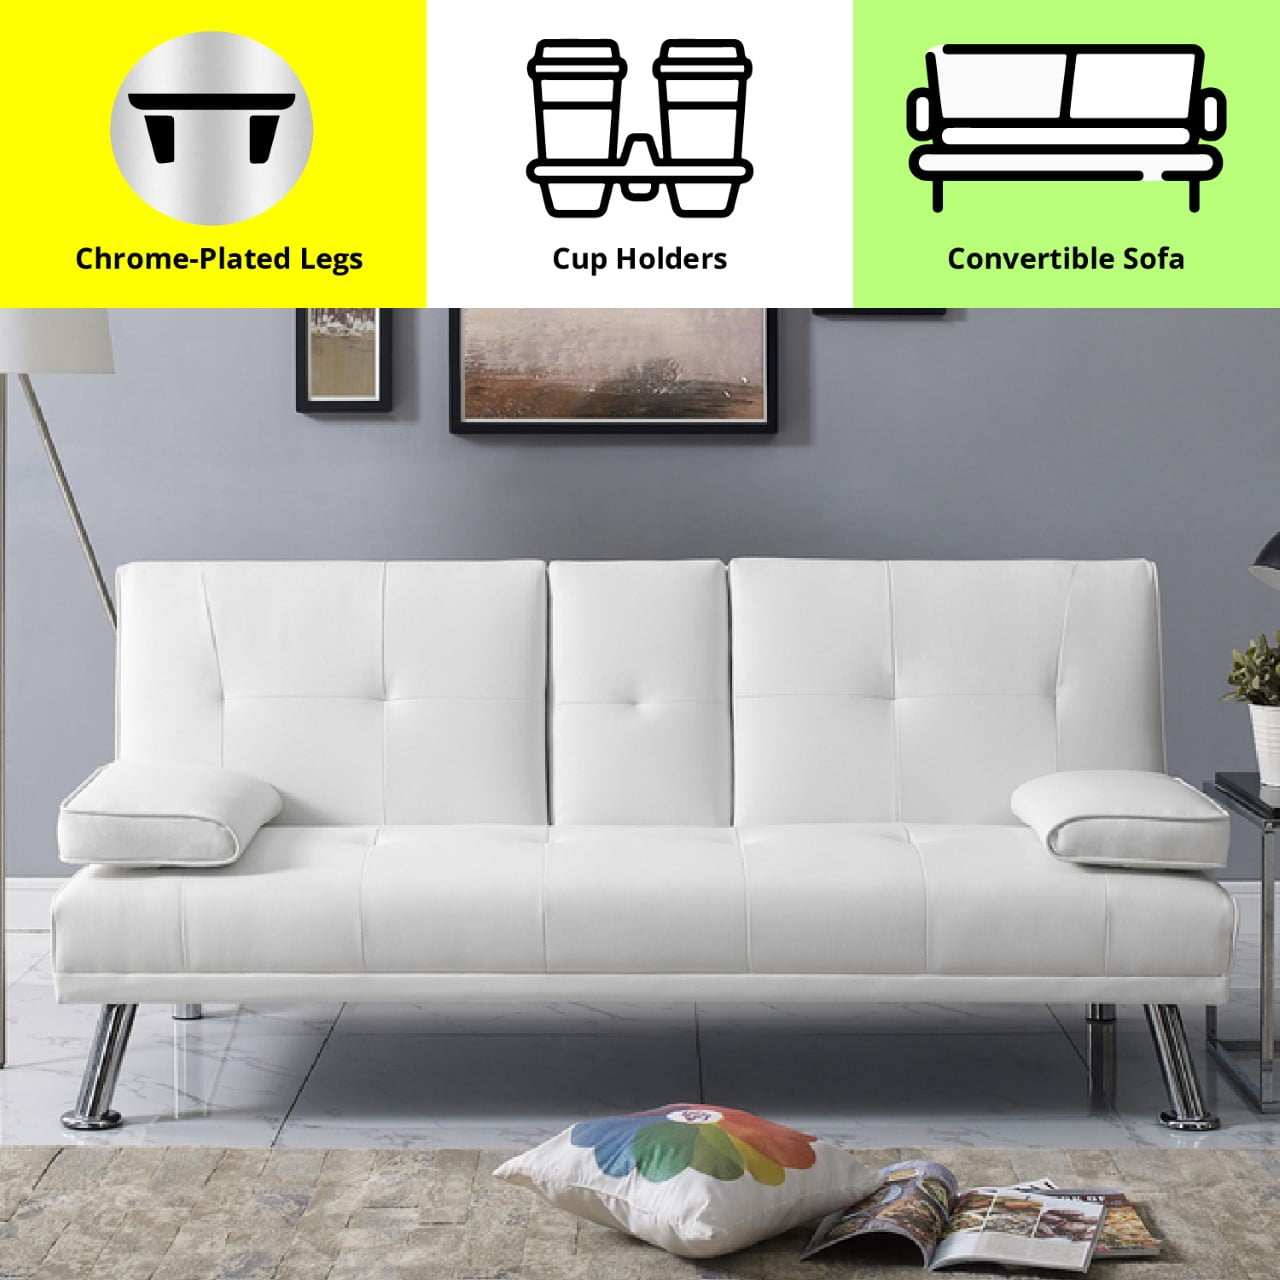 Details about   Leather Futon Sleeper Sofa Bed White Modern Recliner TV Theater Couch Furniture 